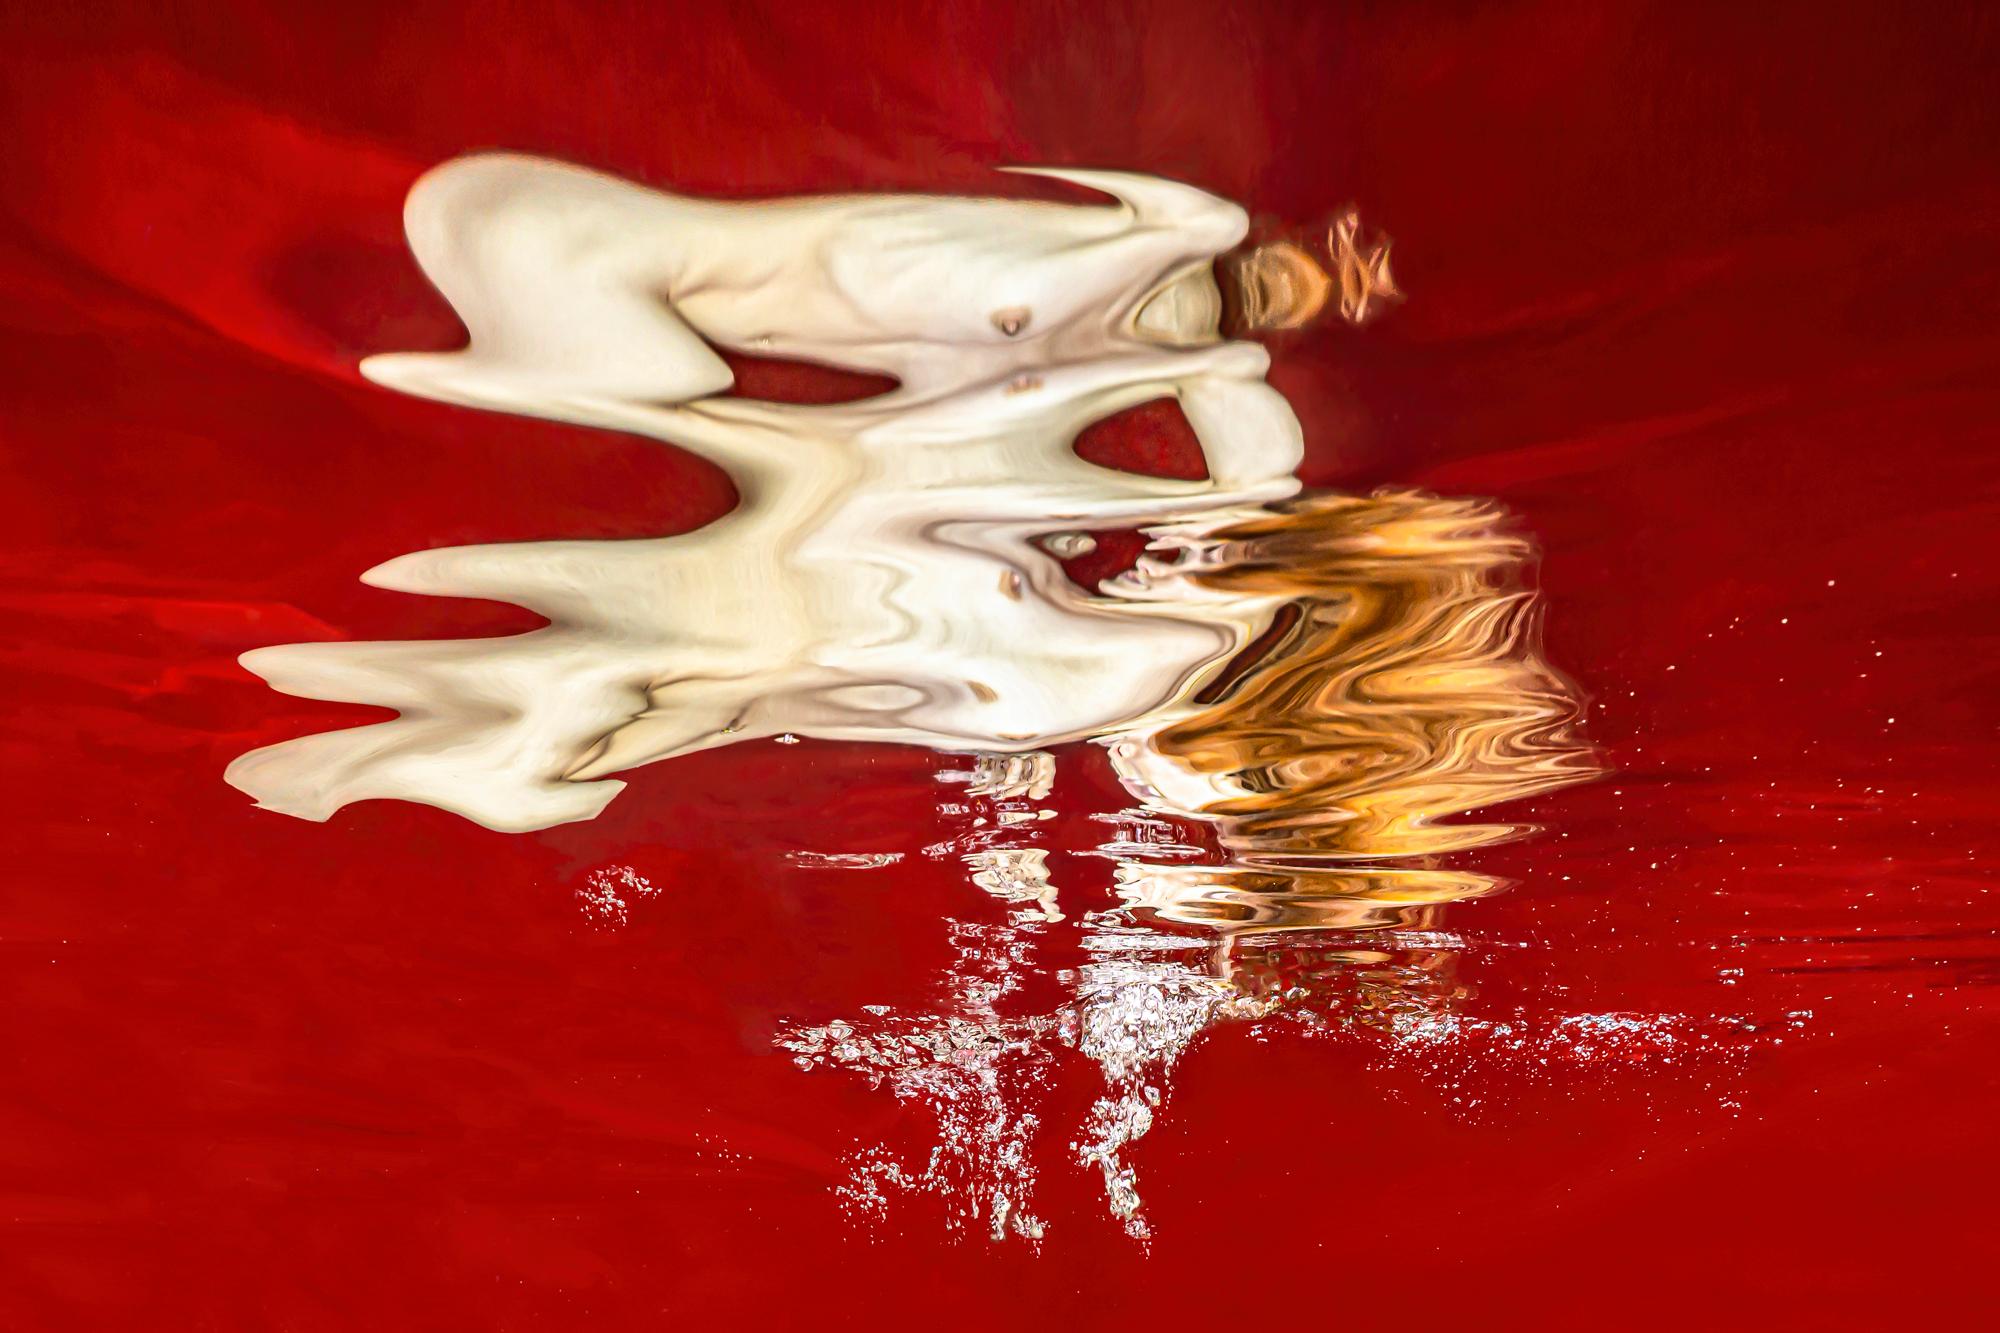 Spark - underwater nude photograph - series REFLECTIONS - archival pigment print